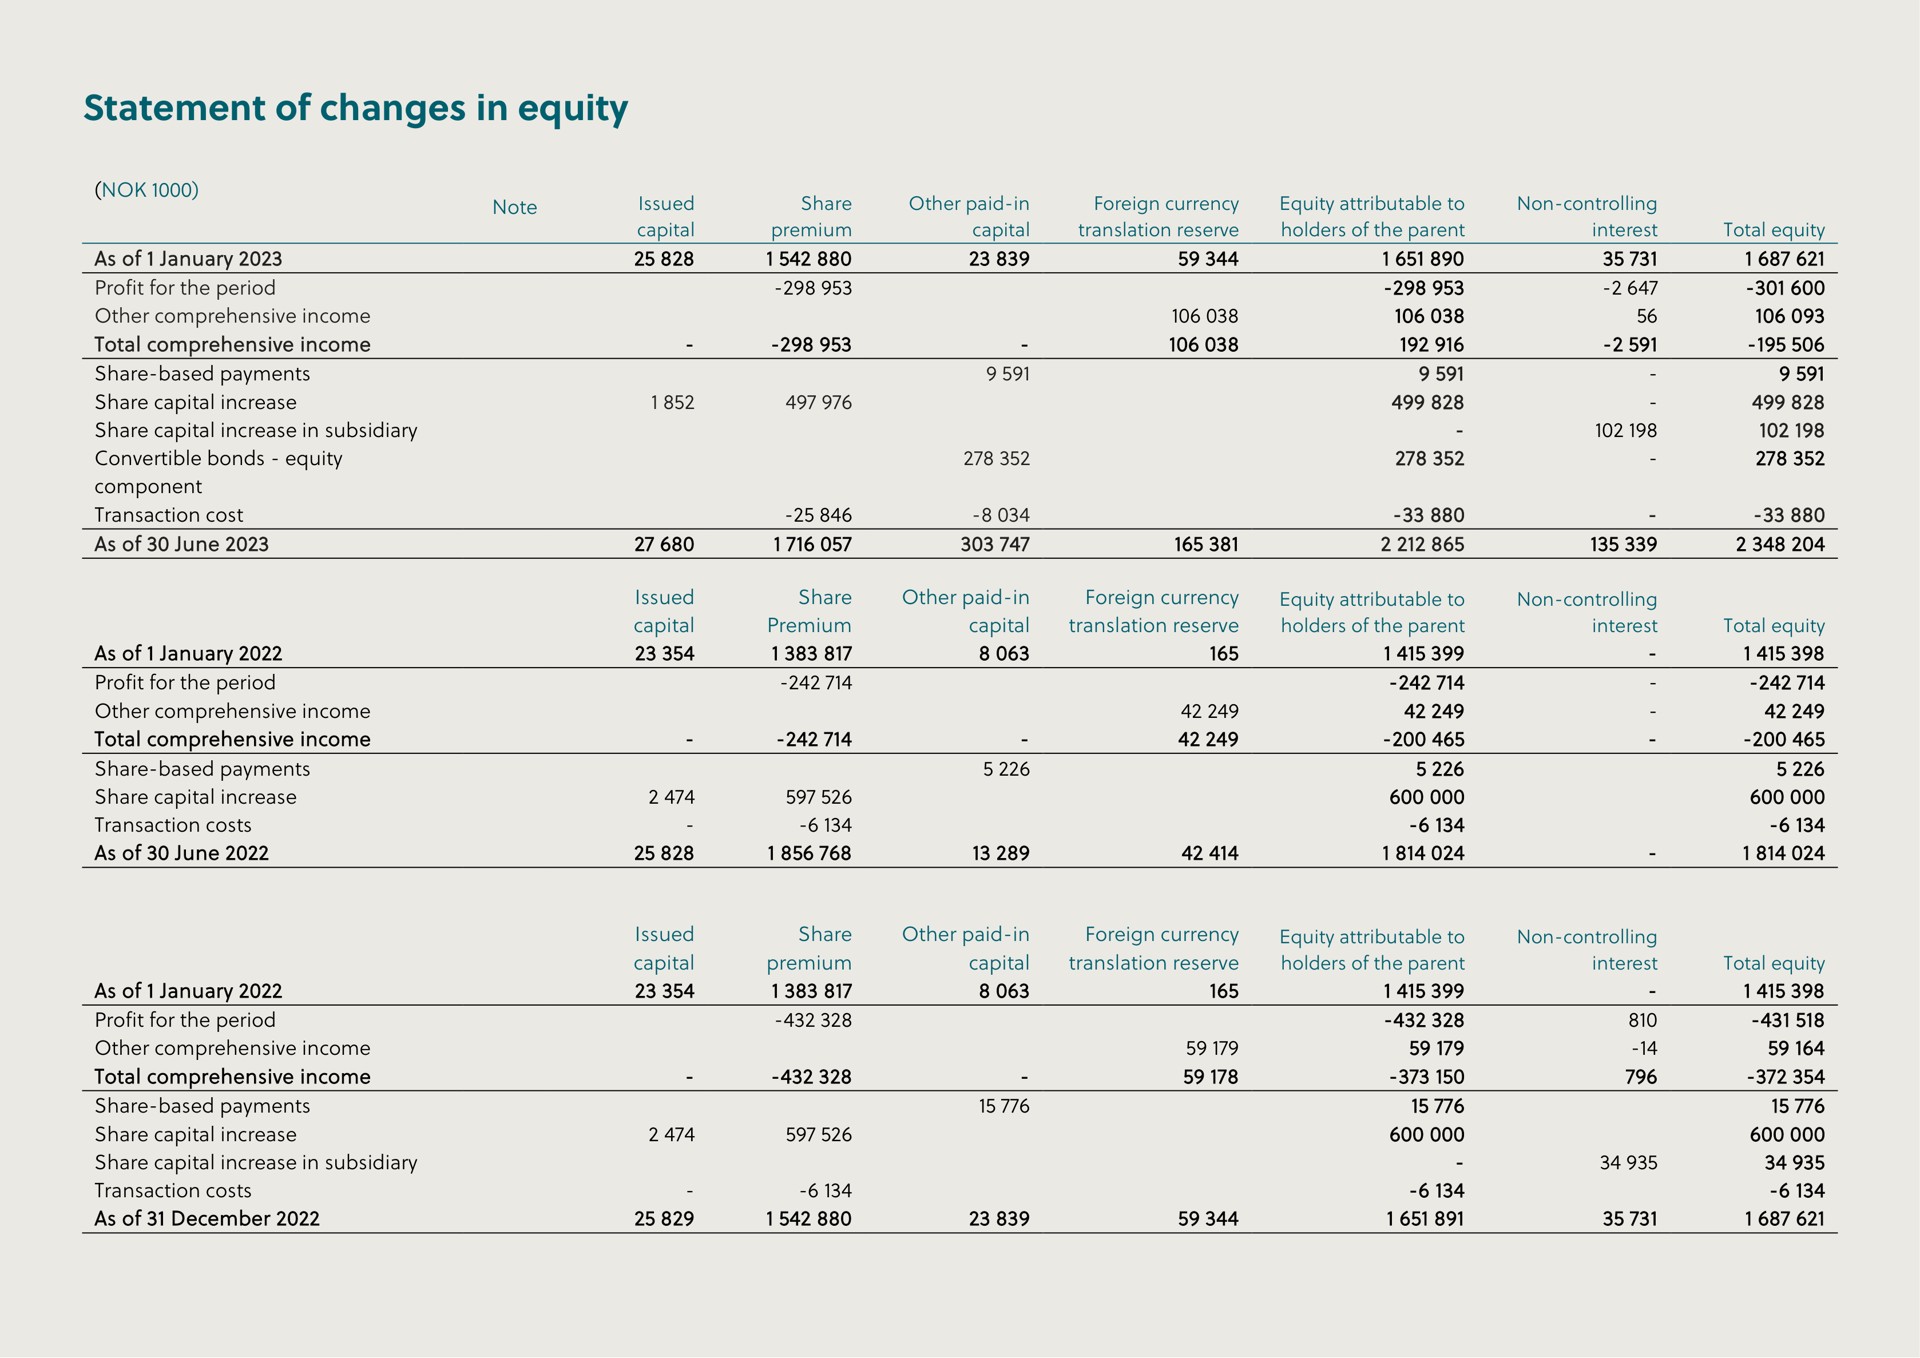 statement of changes in equity as total comprehensive income share capital increase subsidiary convertible bonds component as total comprehensive income share based payments as total comprehensive income as a a a | Hexagon Purus